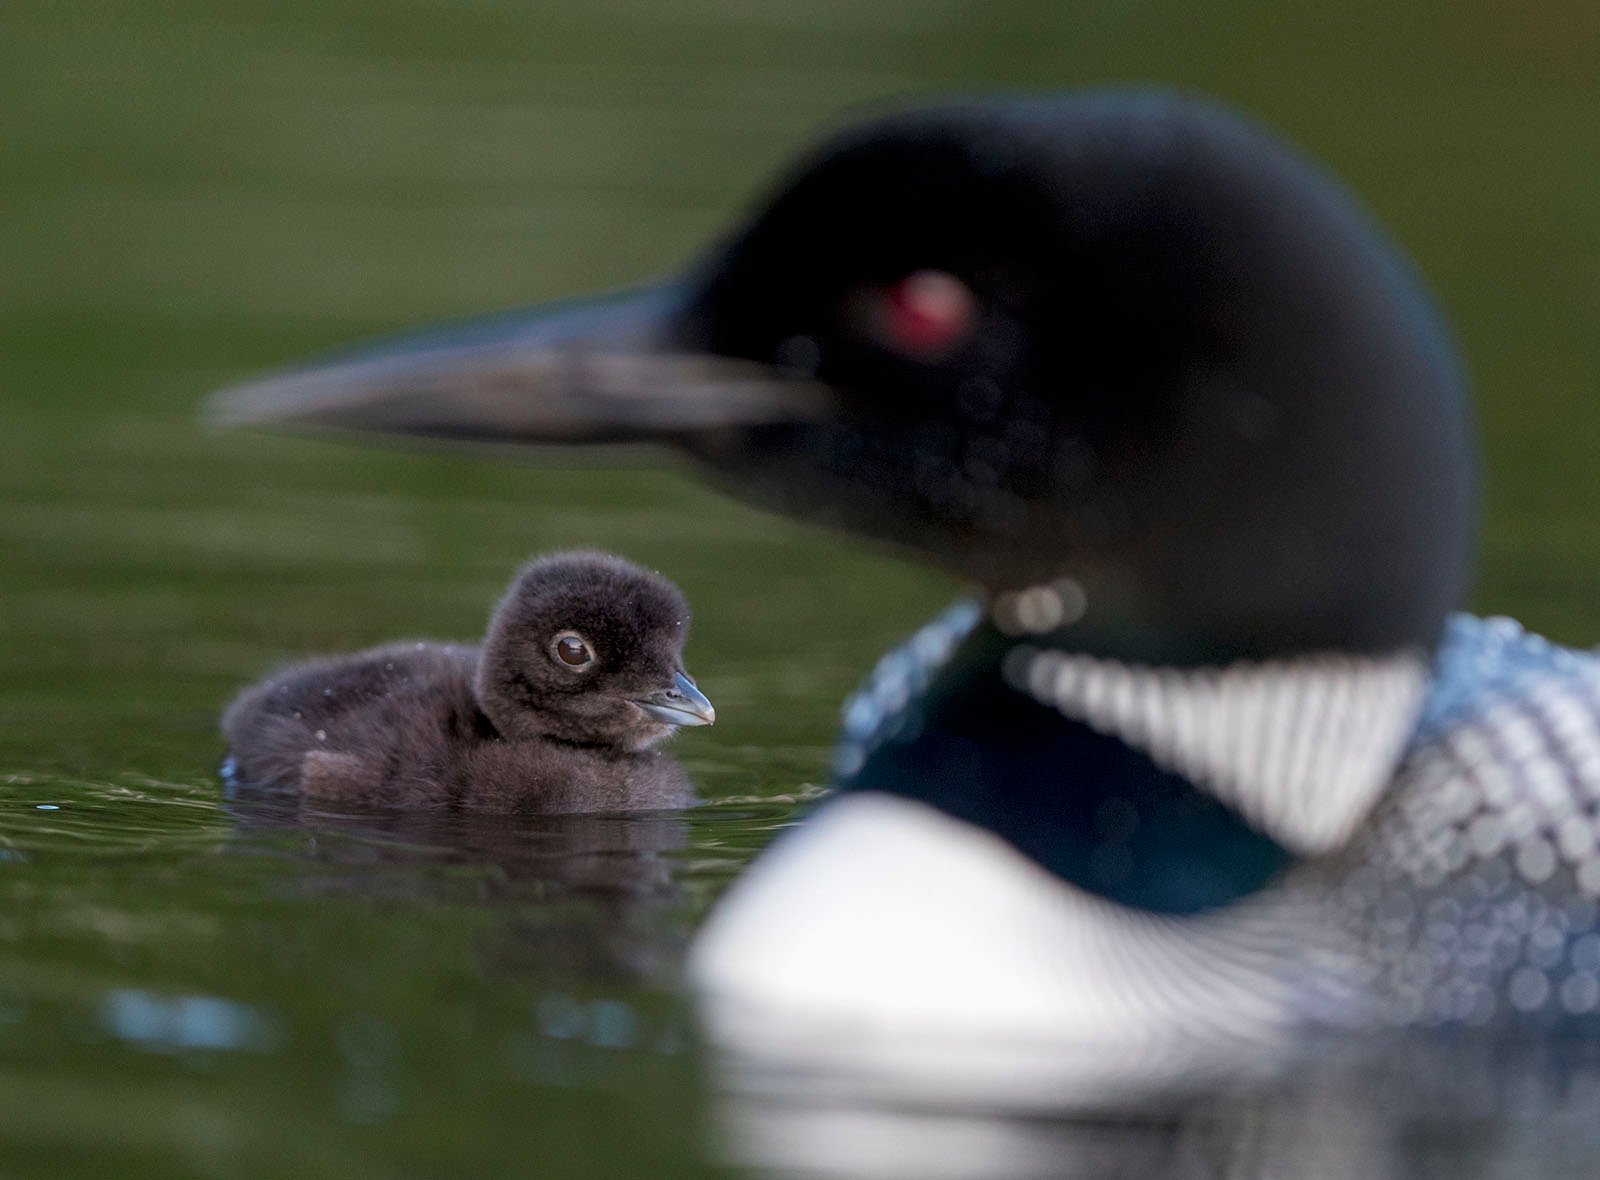 A close-up of a loon swimming on water, accompanied by its fluffy, dark brown chick. the adult loon's striking black and white patterned plumage contrasts with the chick's simple brown feathers.